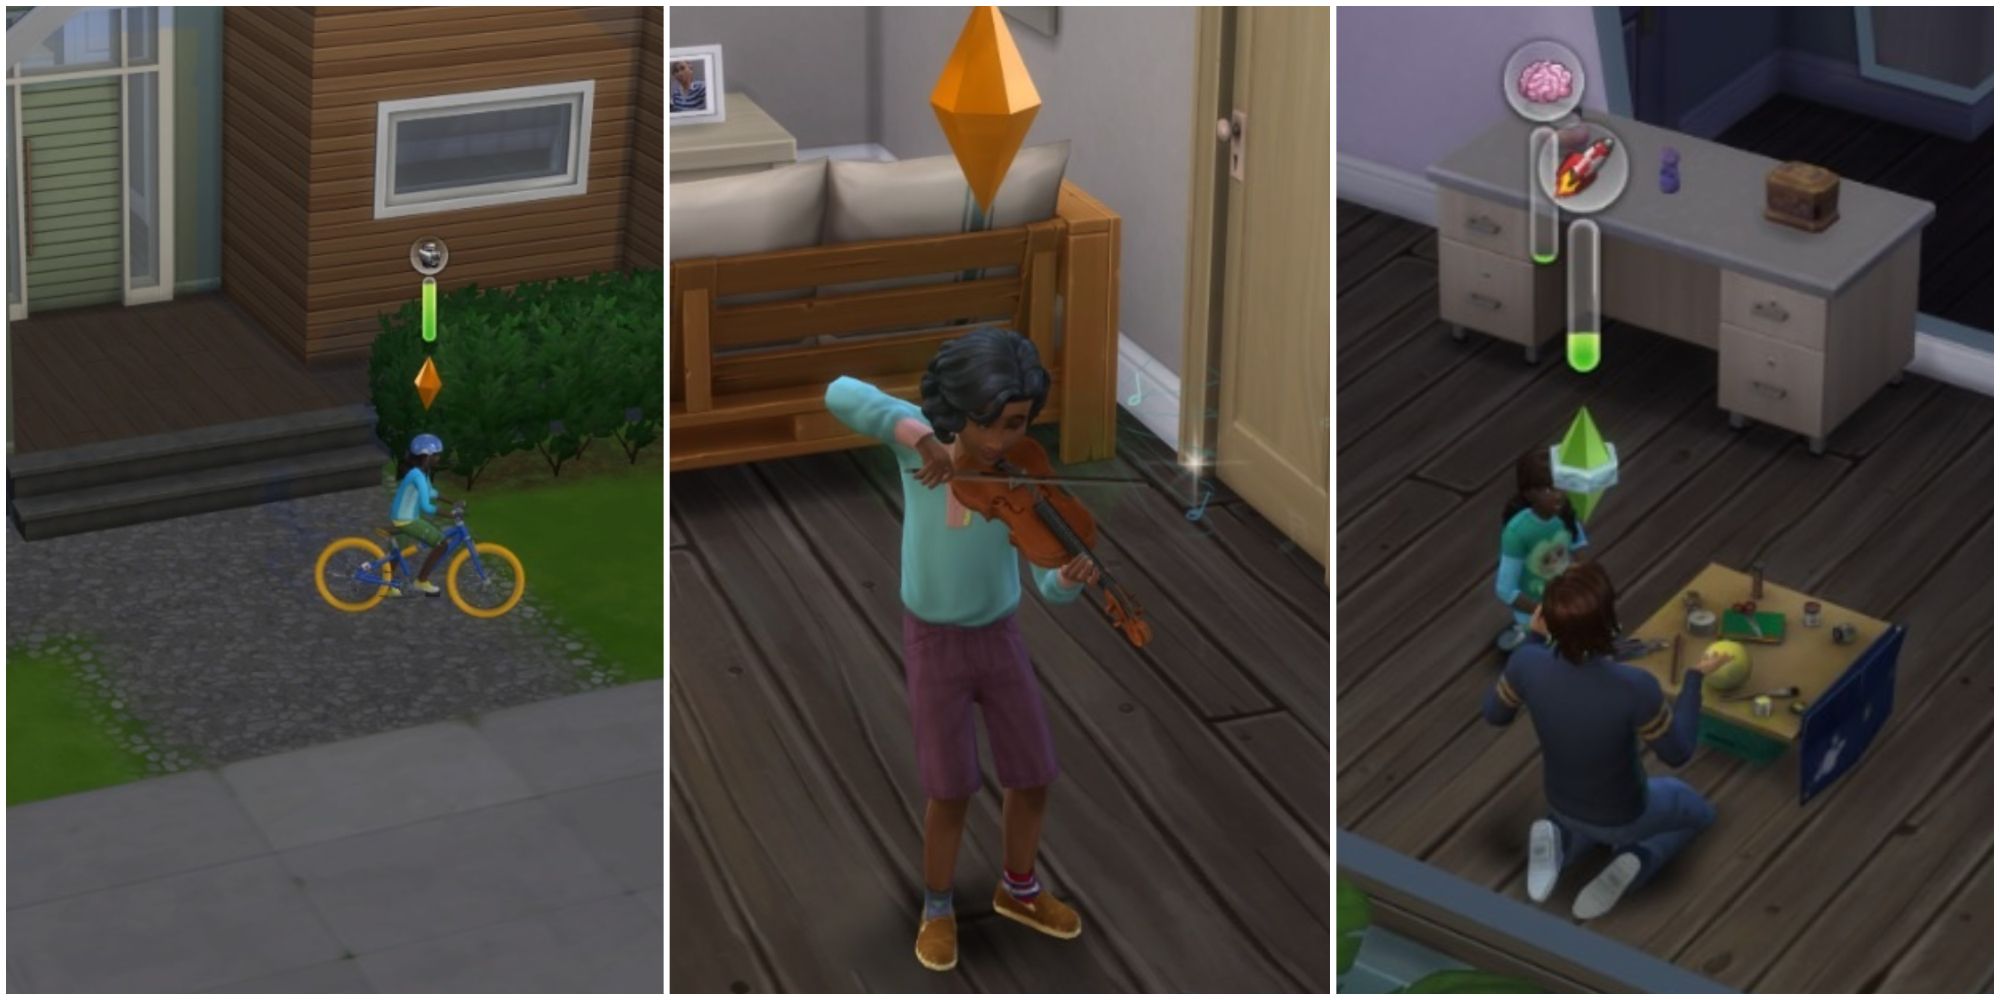 The Sims 4: Growing Together Multi-Skill Aspirations Guide